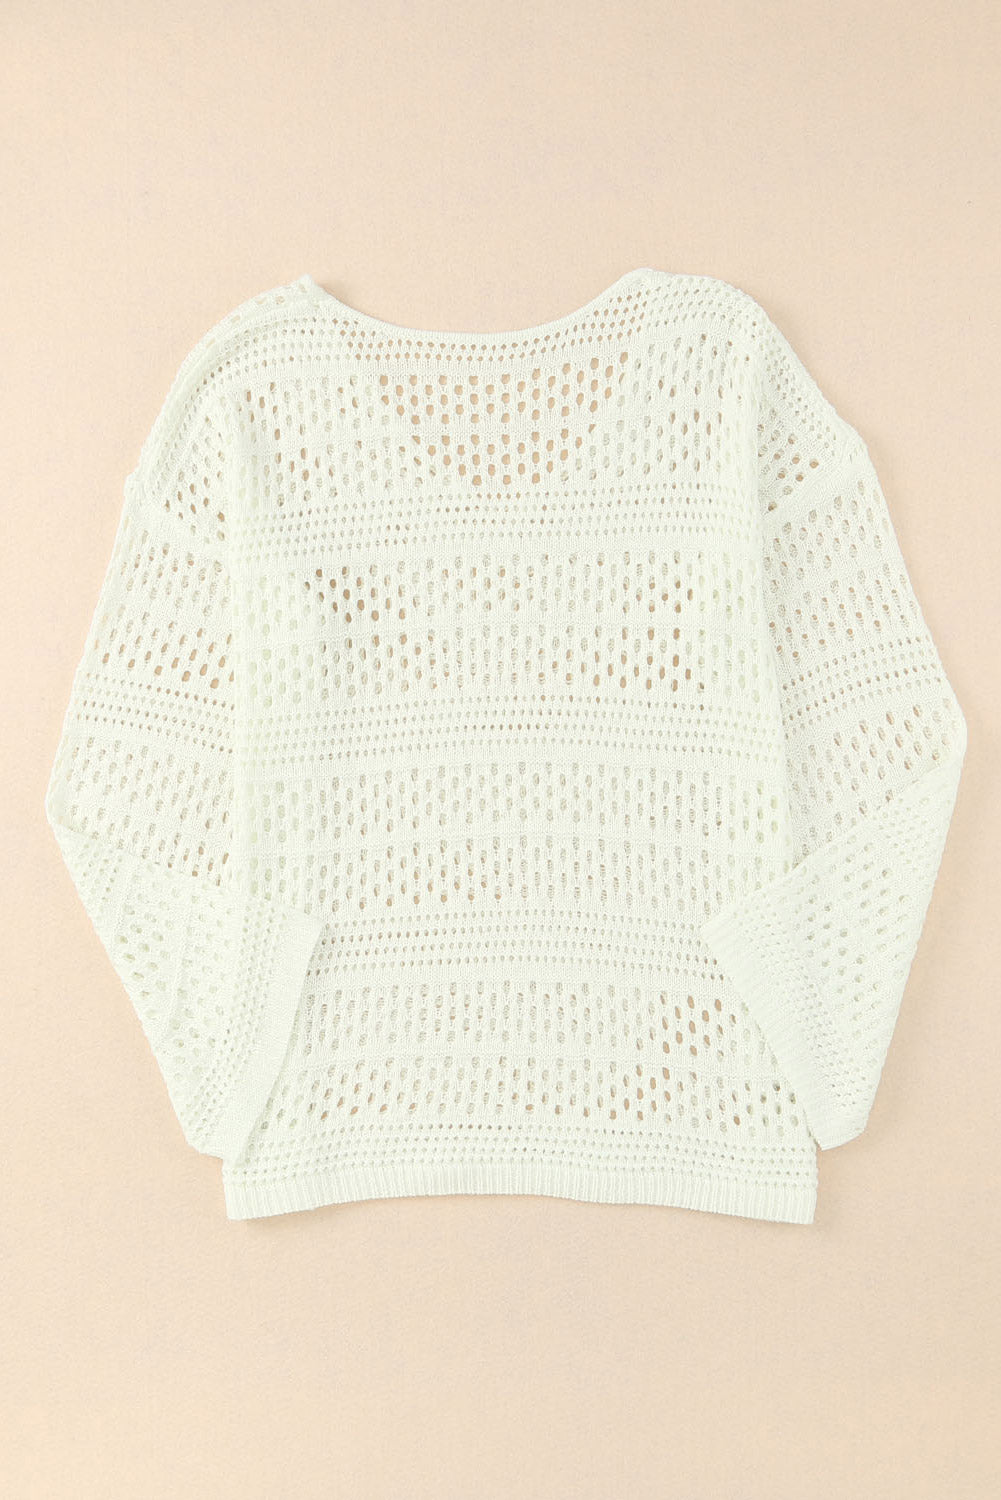 White Hollow Out Crochet V Neck Pullover Sweater Blue Zone Planet